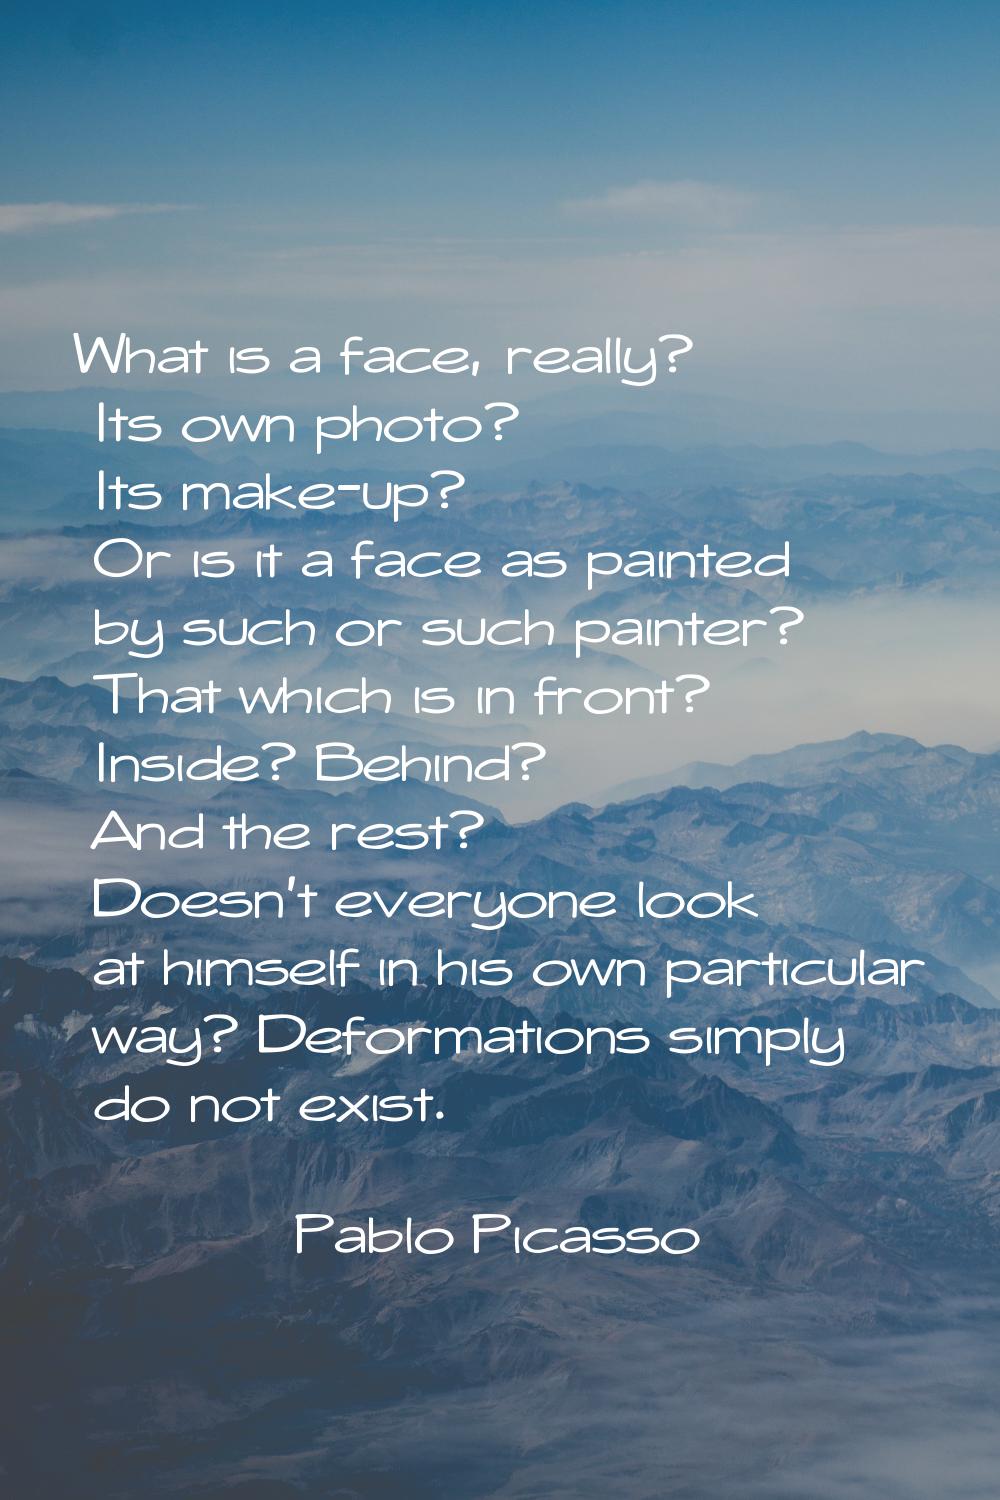 What is a face, really? Its own photo? Its make-up? Or is it a face as painted by such or such pain